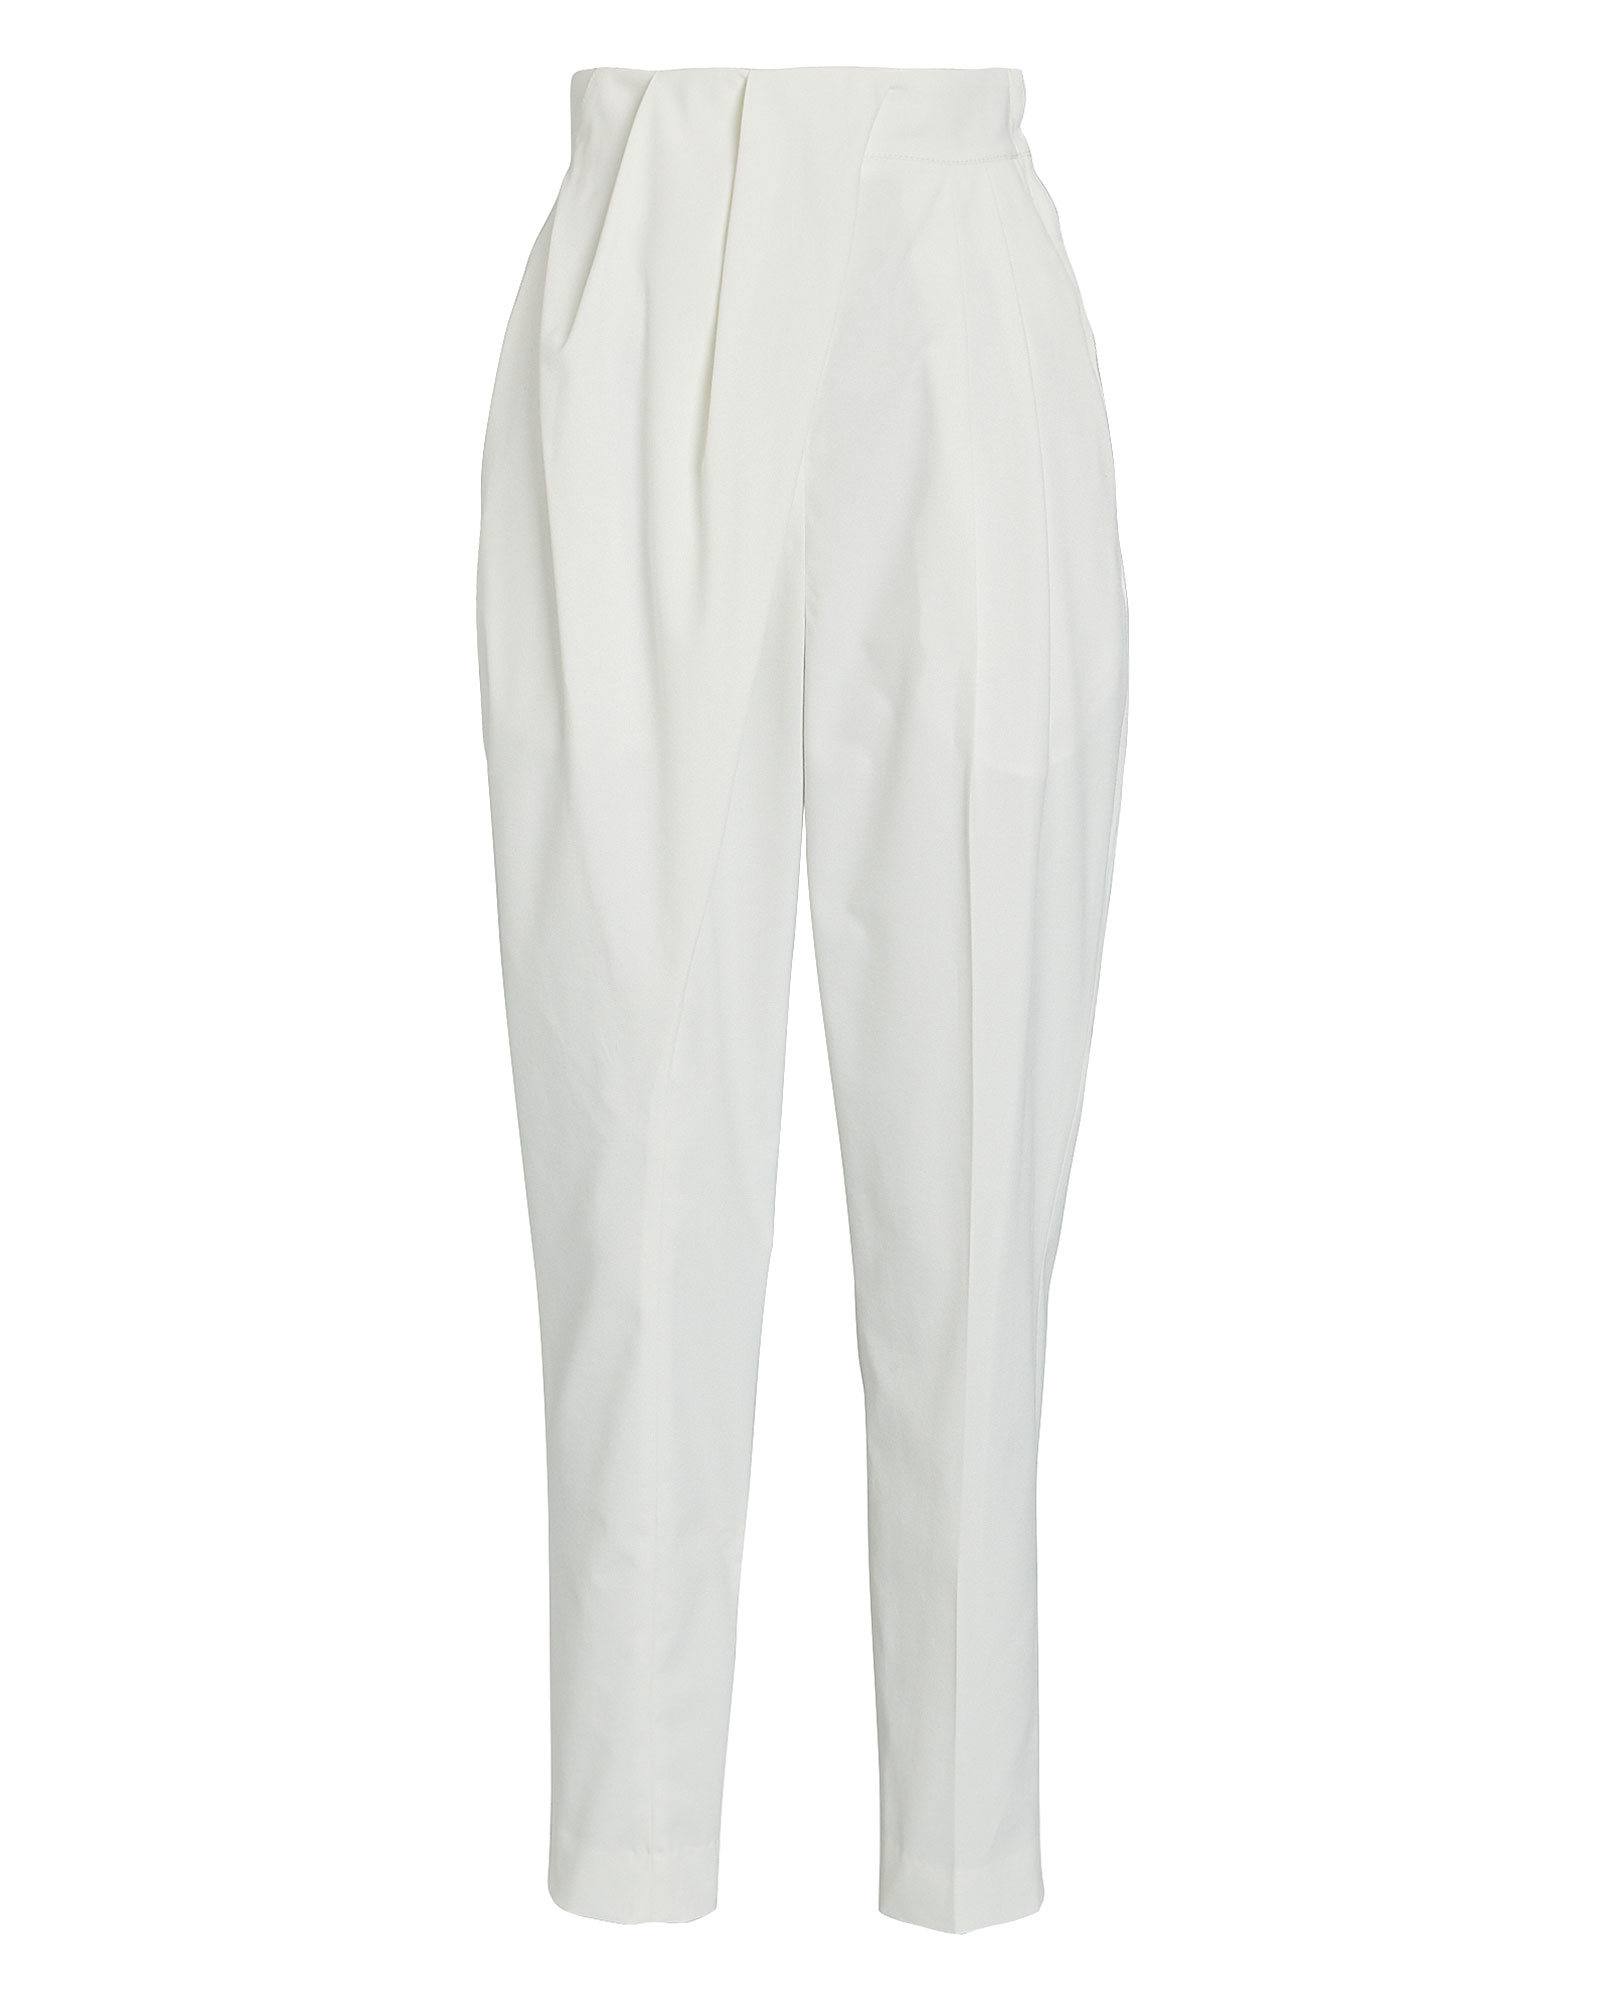 Proenza Schouler Tapered Pleated Pants | INTERMIX®